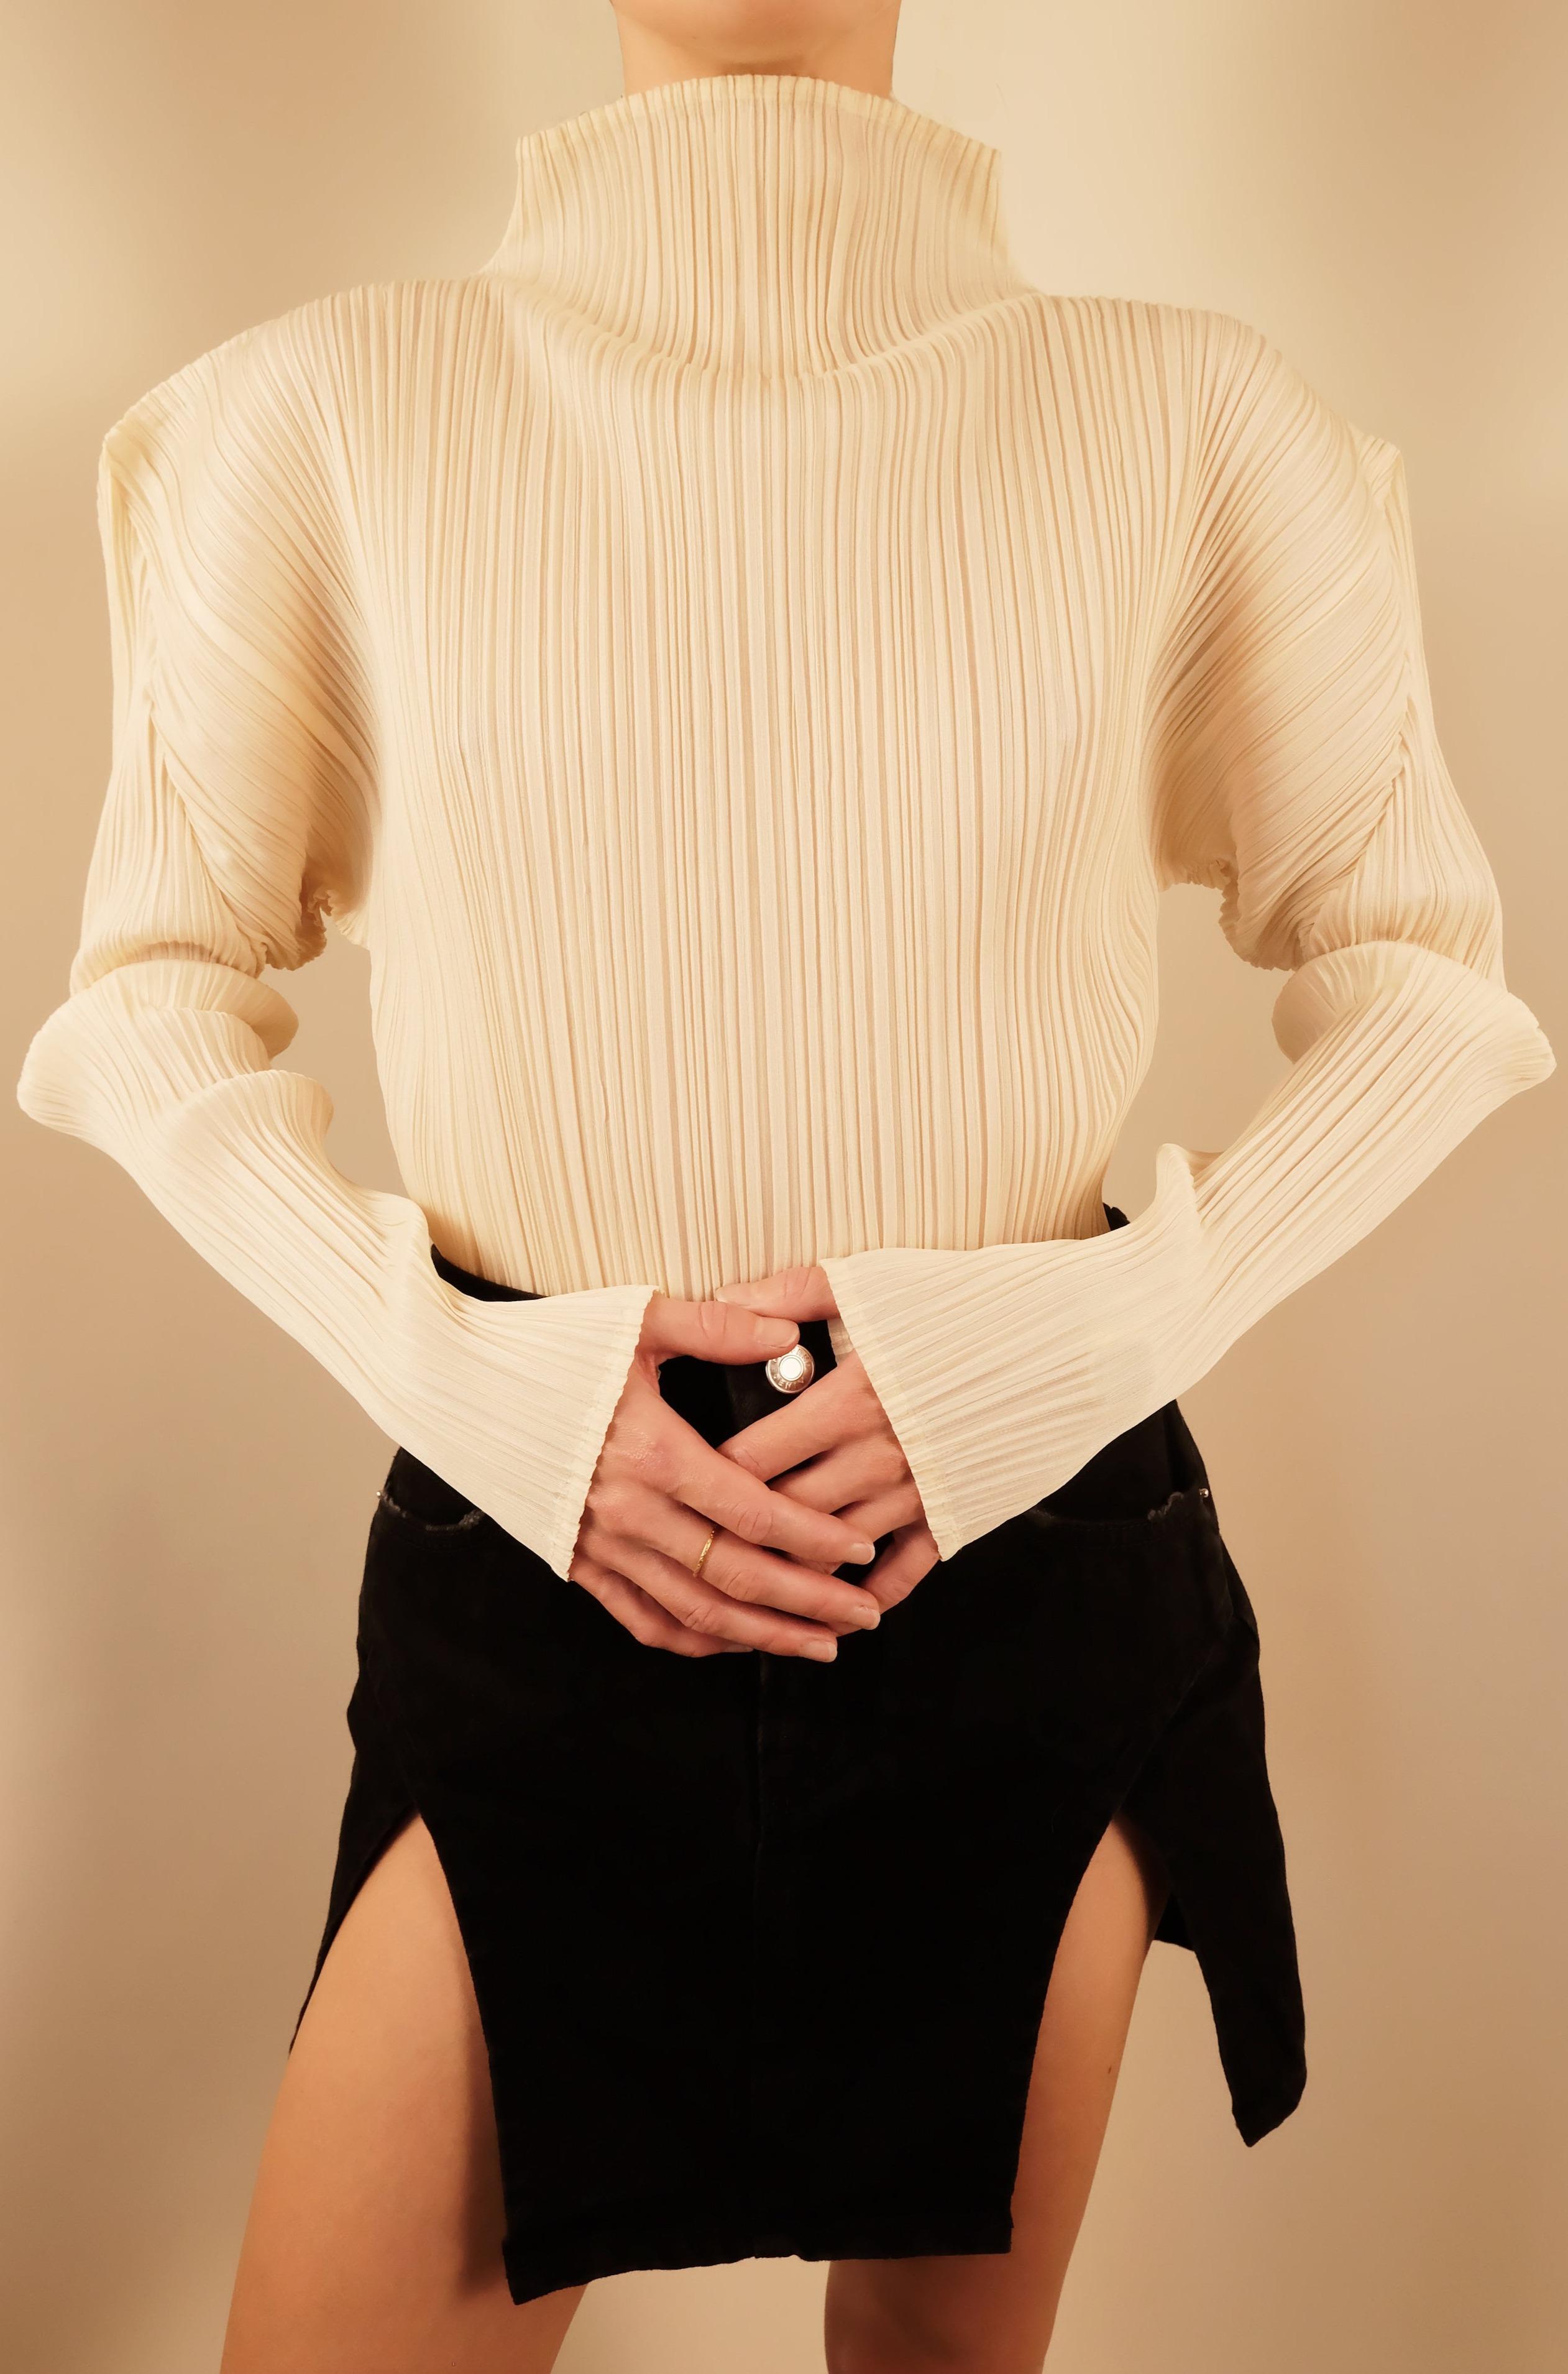 ISSEY MIYAKE Pleats Please Sculptural Cream Blouse with Exaggerated Silhouette In Good Condition For Sale In Morongo Valley, CA